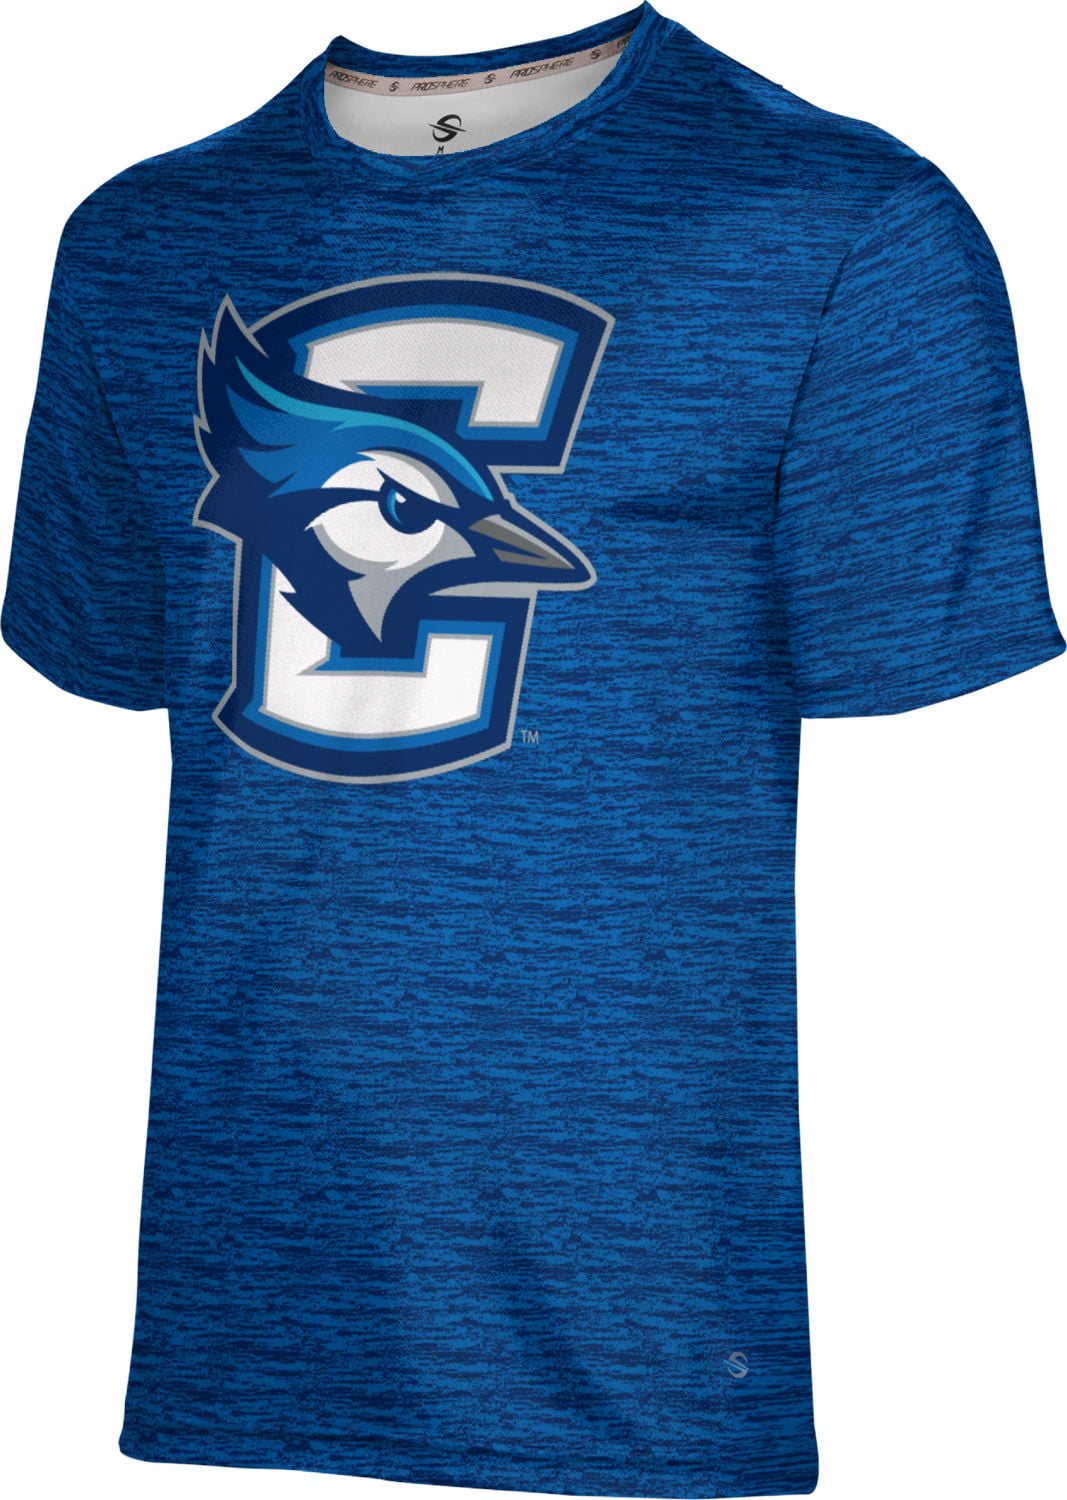 Brushed ProSphere Creighton University Fathers Day Mens Performance T-Shirt